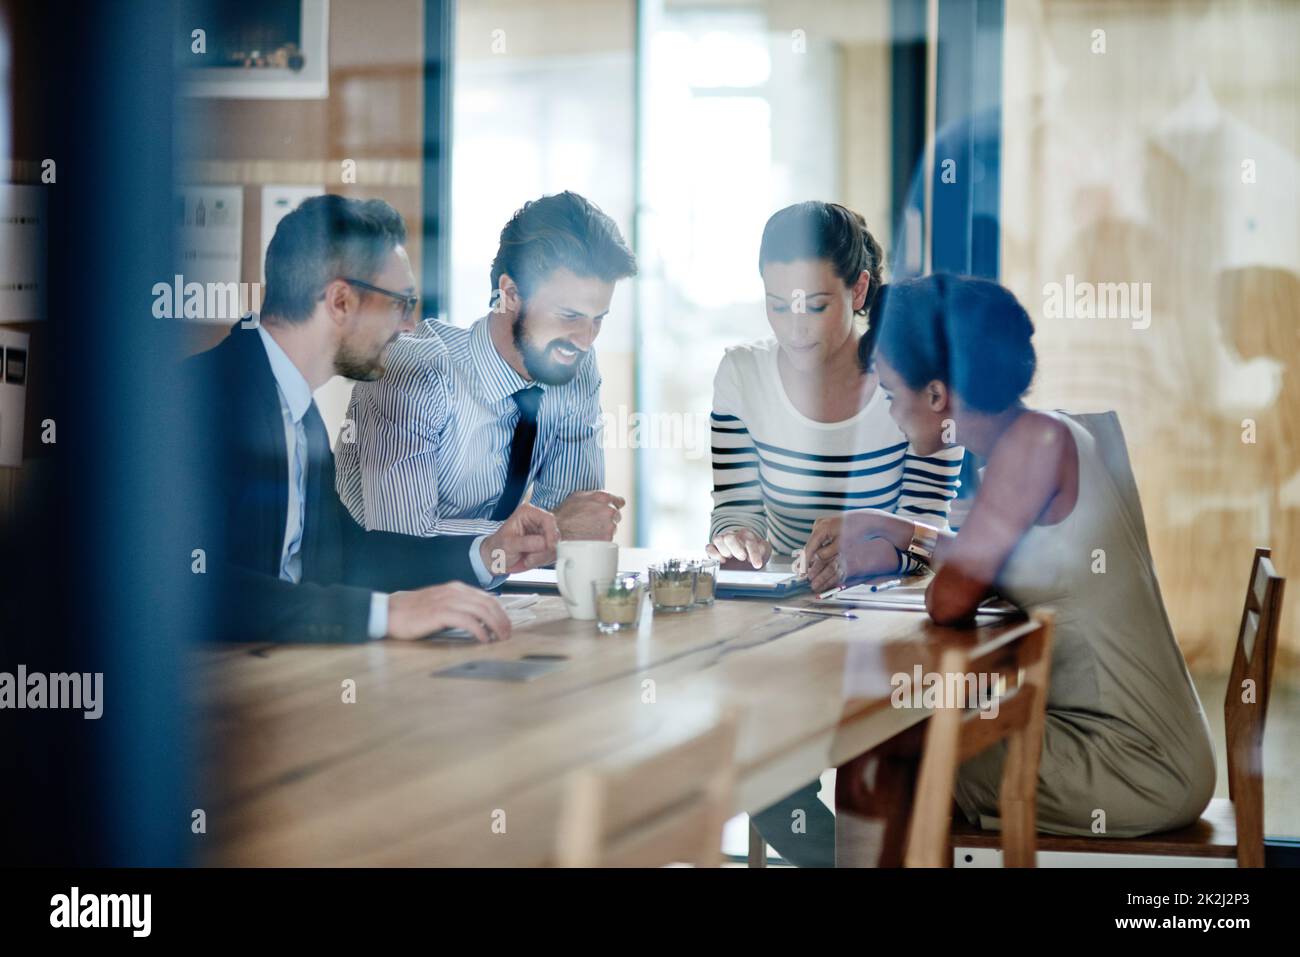 Taking their ideas online. Through the glass shot of a group of colleagues working together in an office. Stock Photo